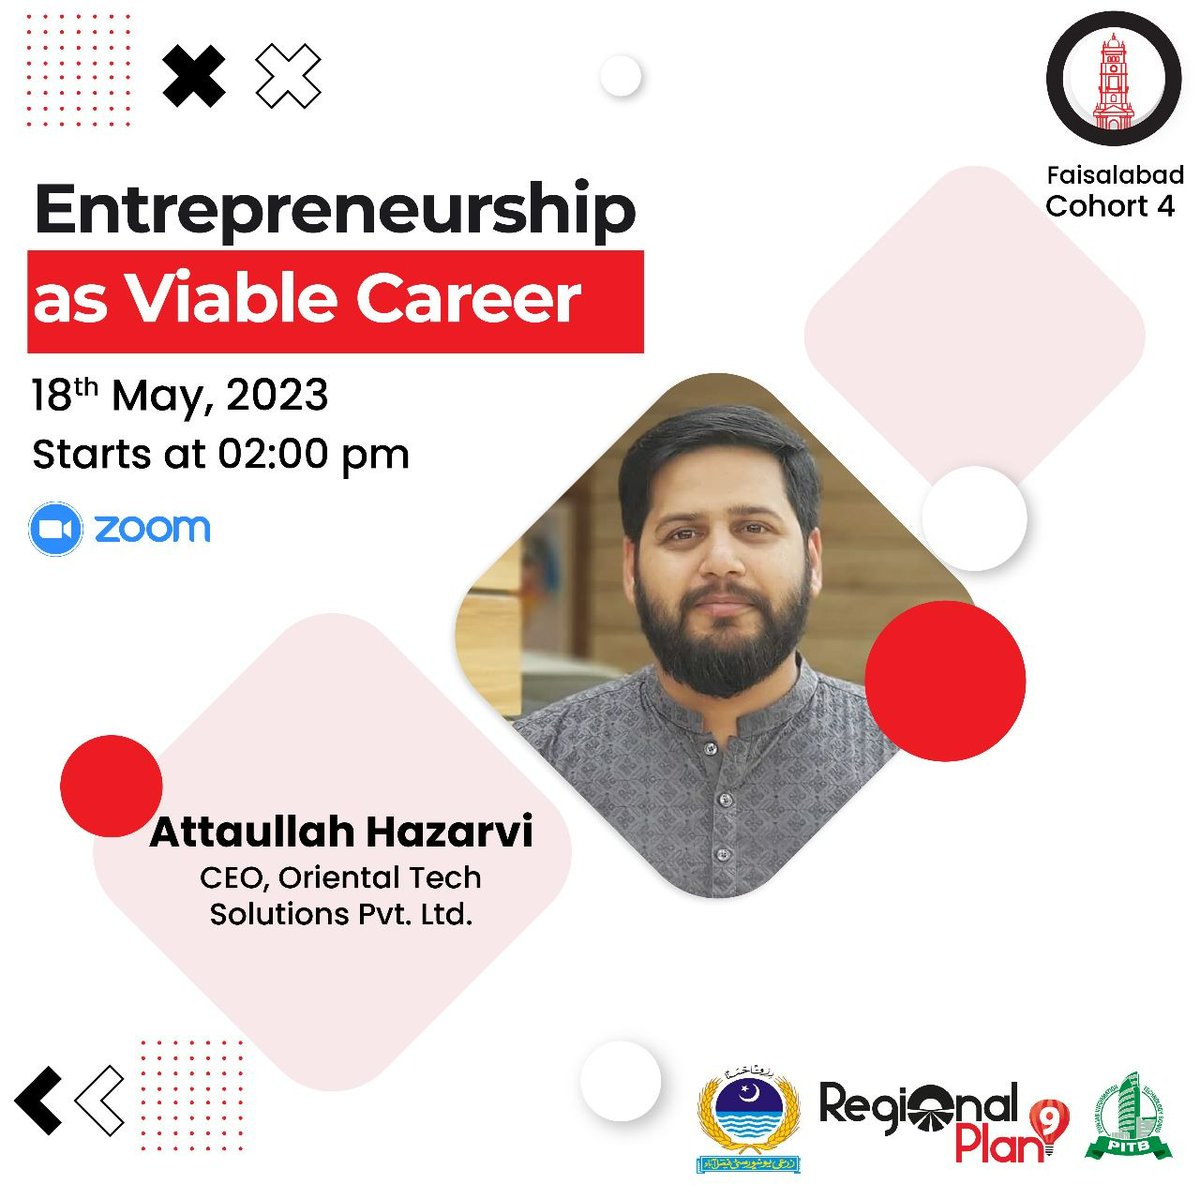 Entrepreneurship as a viable career!
want to know how?
Today i'll be attending PITB Incubation Wing as a speaker to discuss the incredible potential of entrepreneurship as a viable career path! 🌟

#Entrepreneurship  #PersonalJourney  #AttaullahHazarvi #OrientalTechSolutions